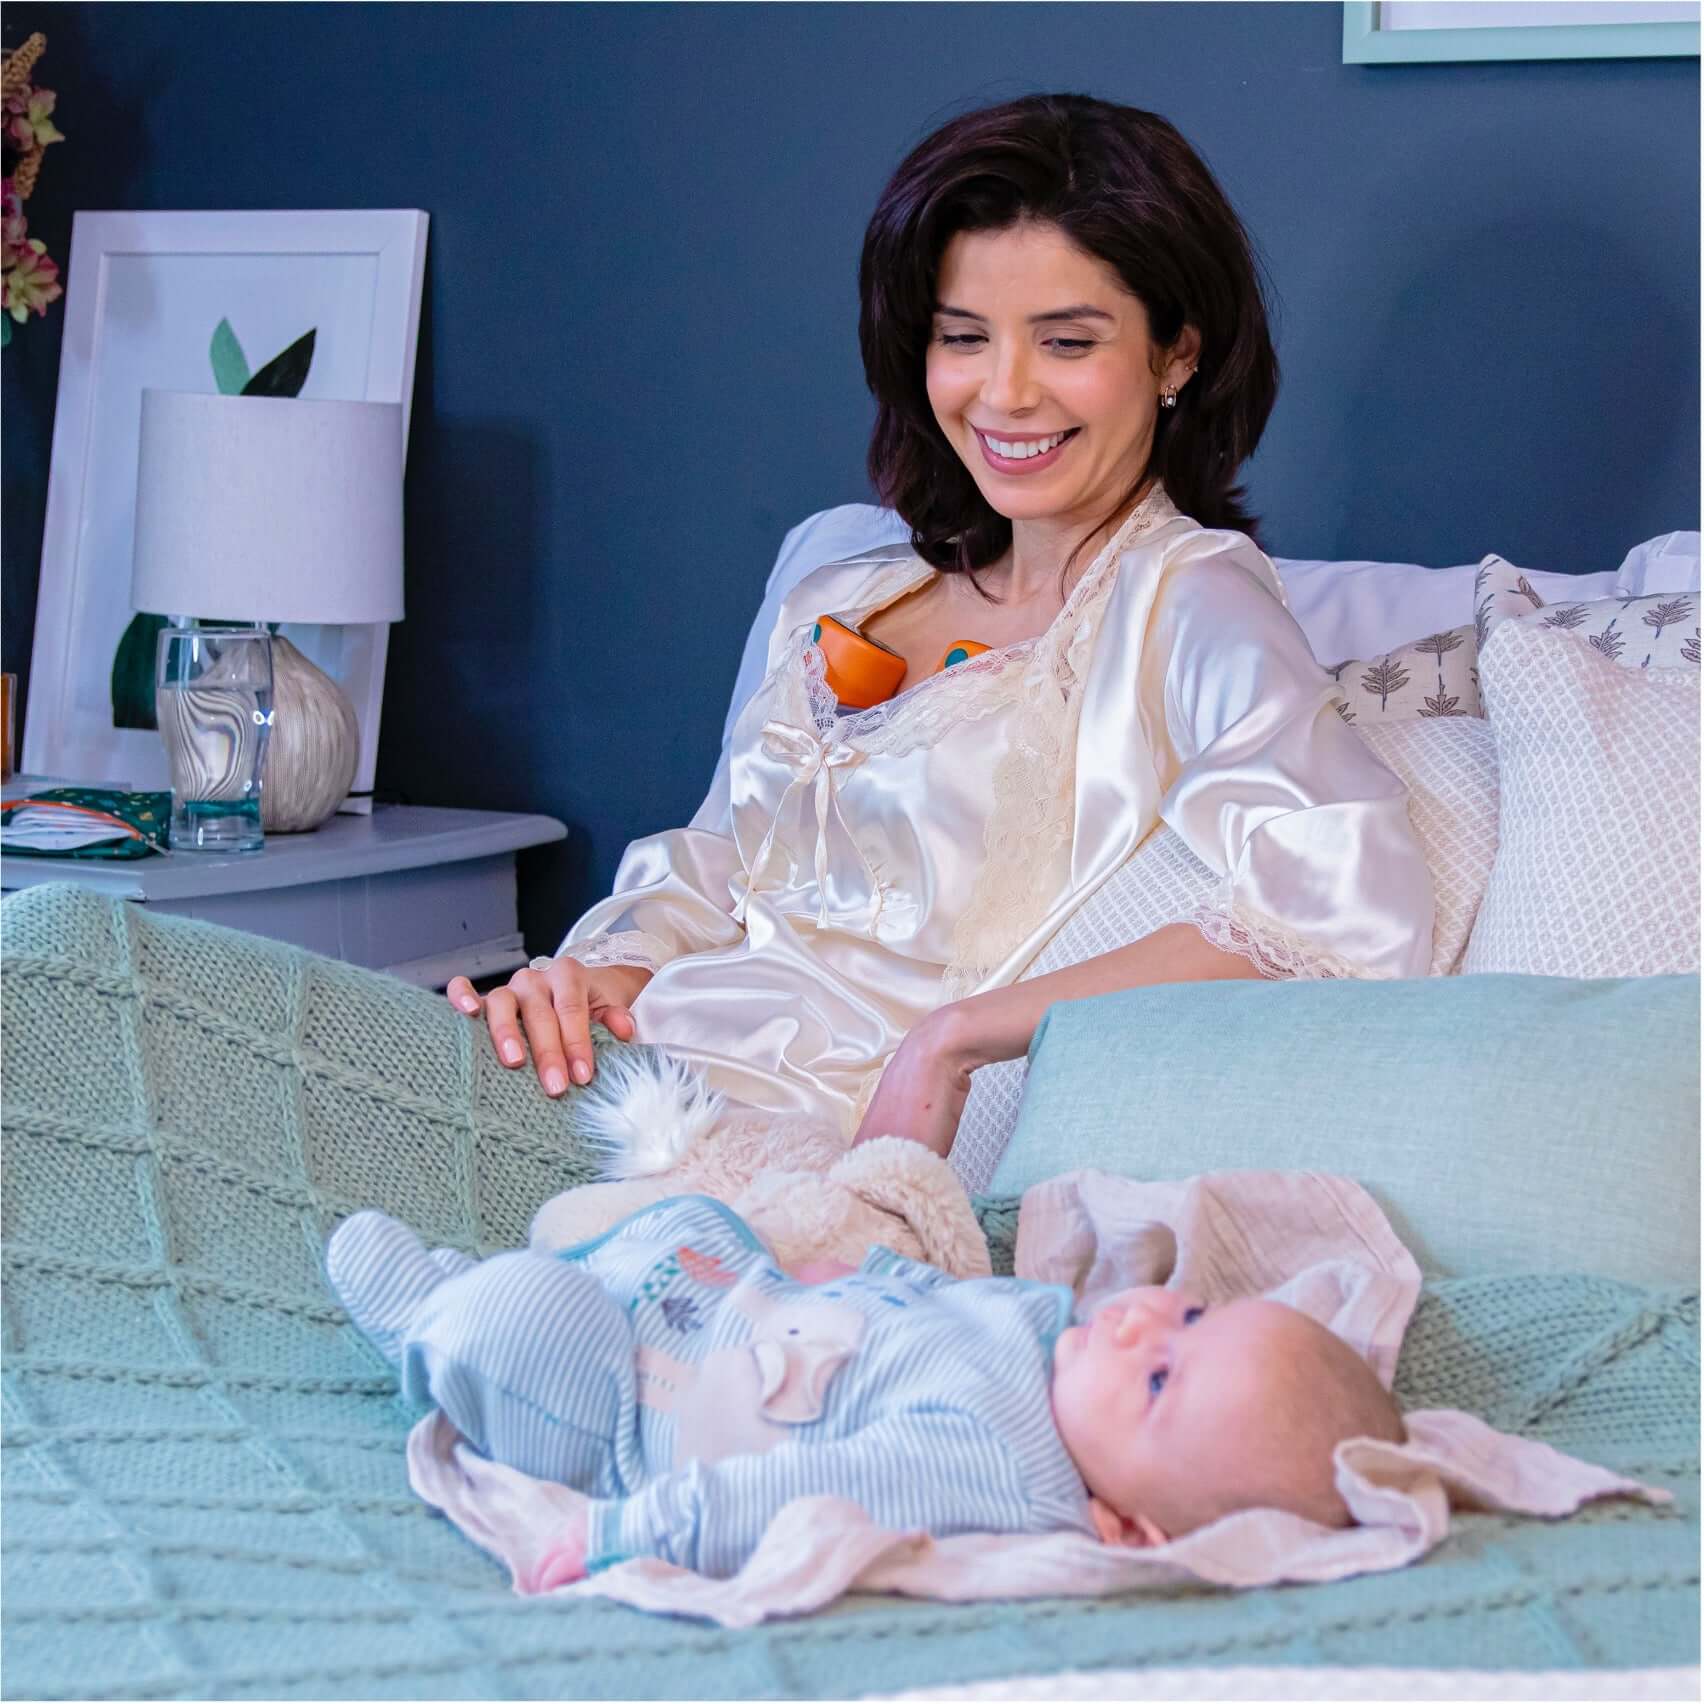 mom relaxingly pumping with pump-a-wear wearable pump while looking after her baby